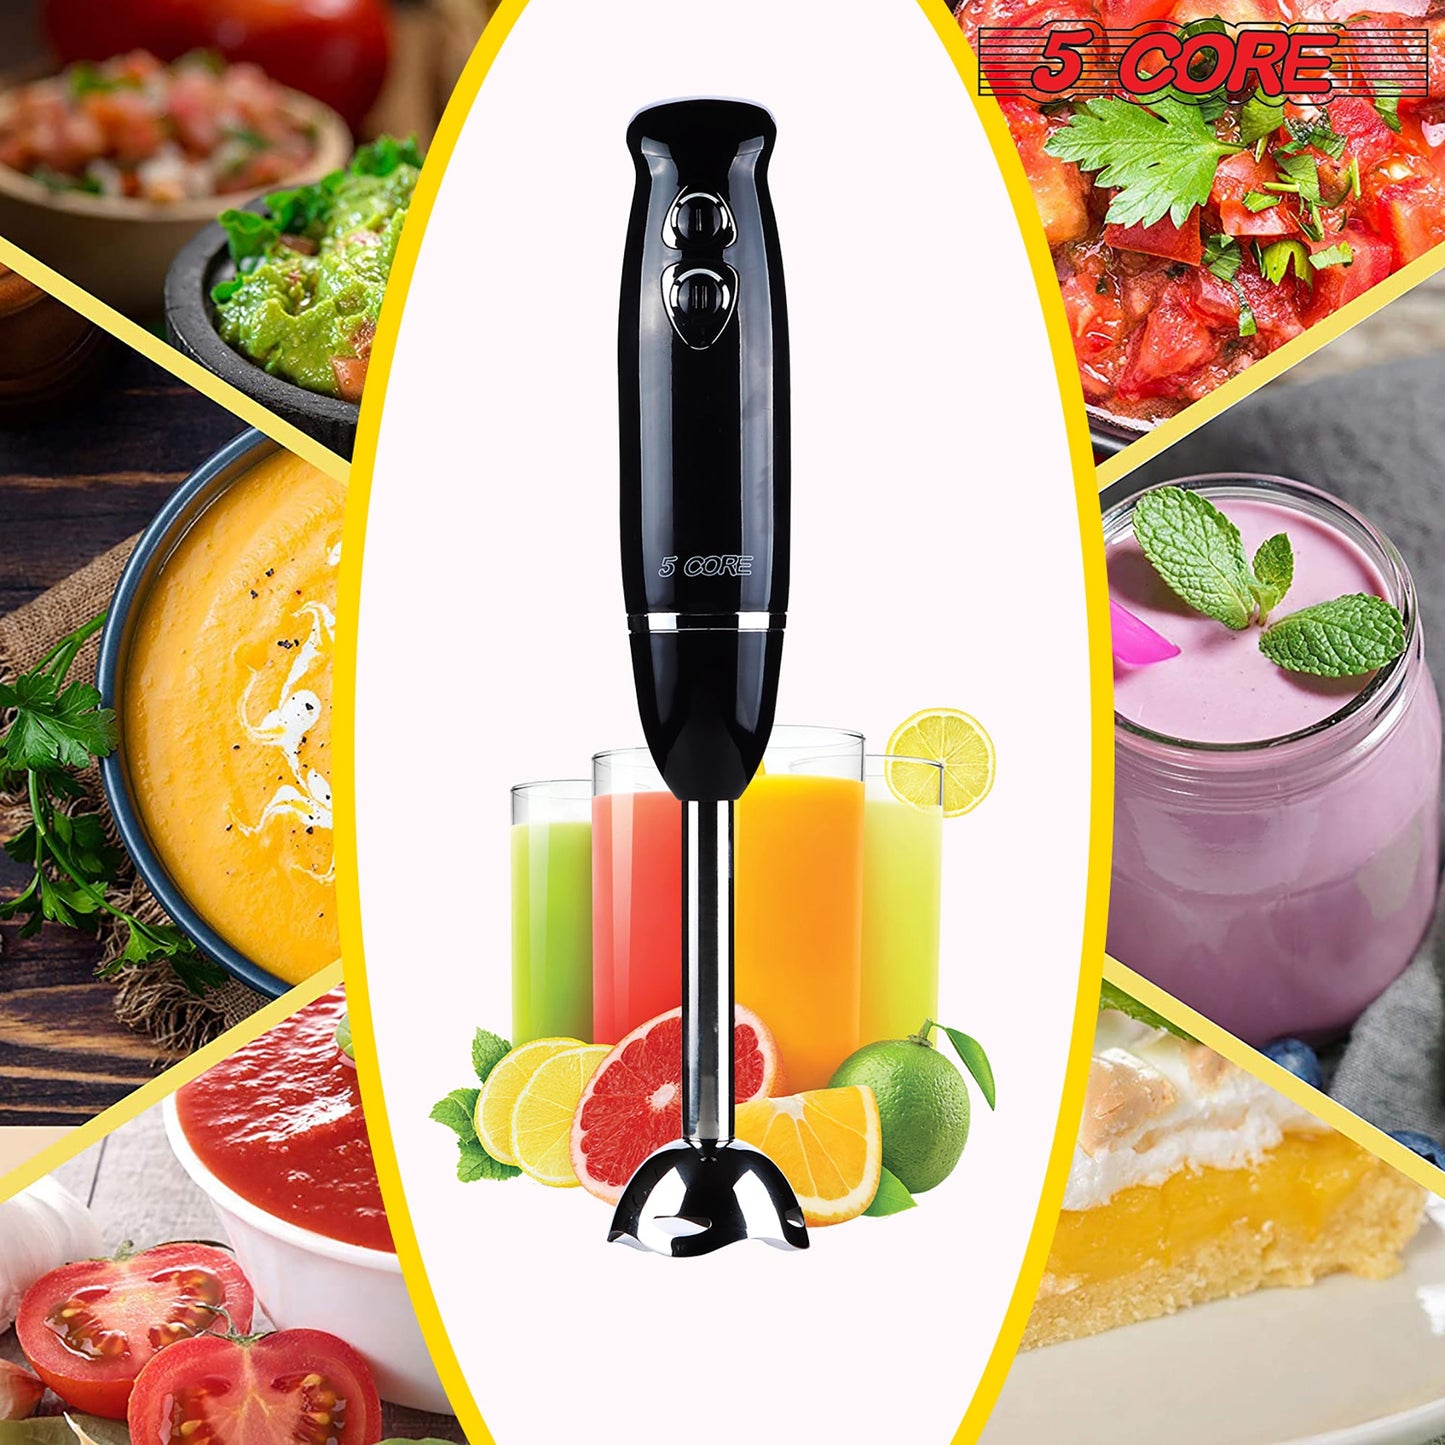 5Core Immersion Hand Blender 500W Electric Handheld Mixer w 2 Mixing Speed for Smoothies Puree-6